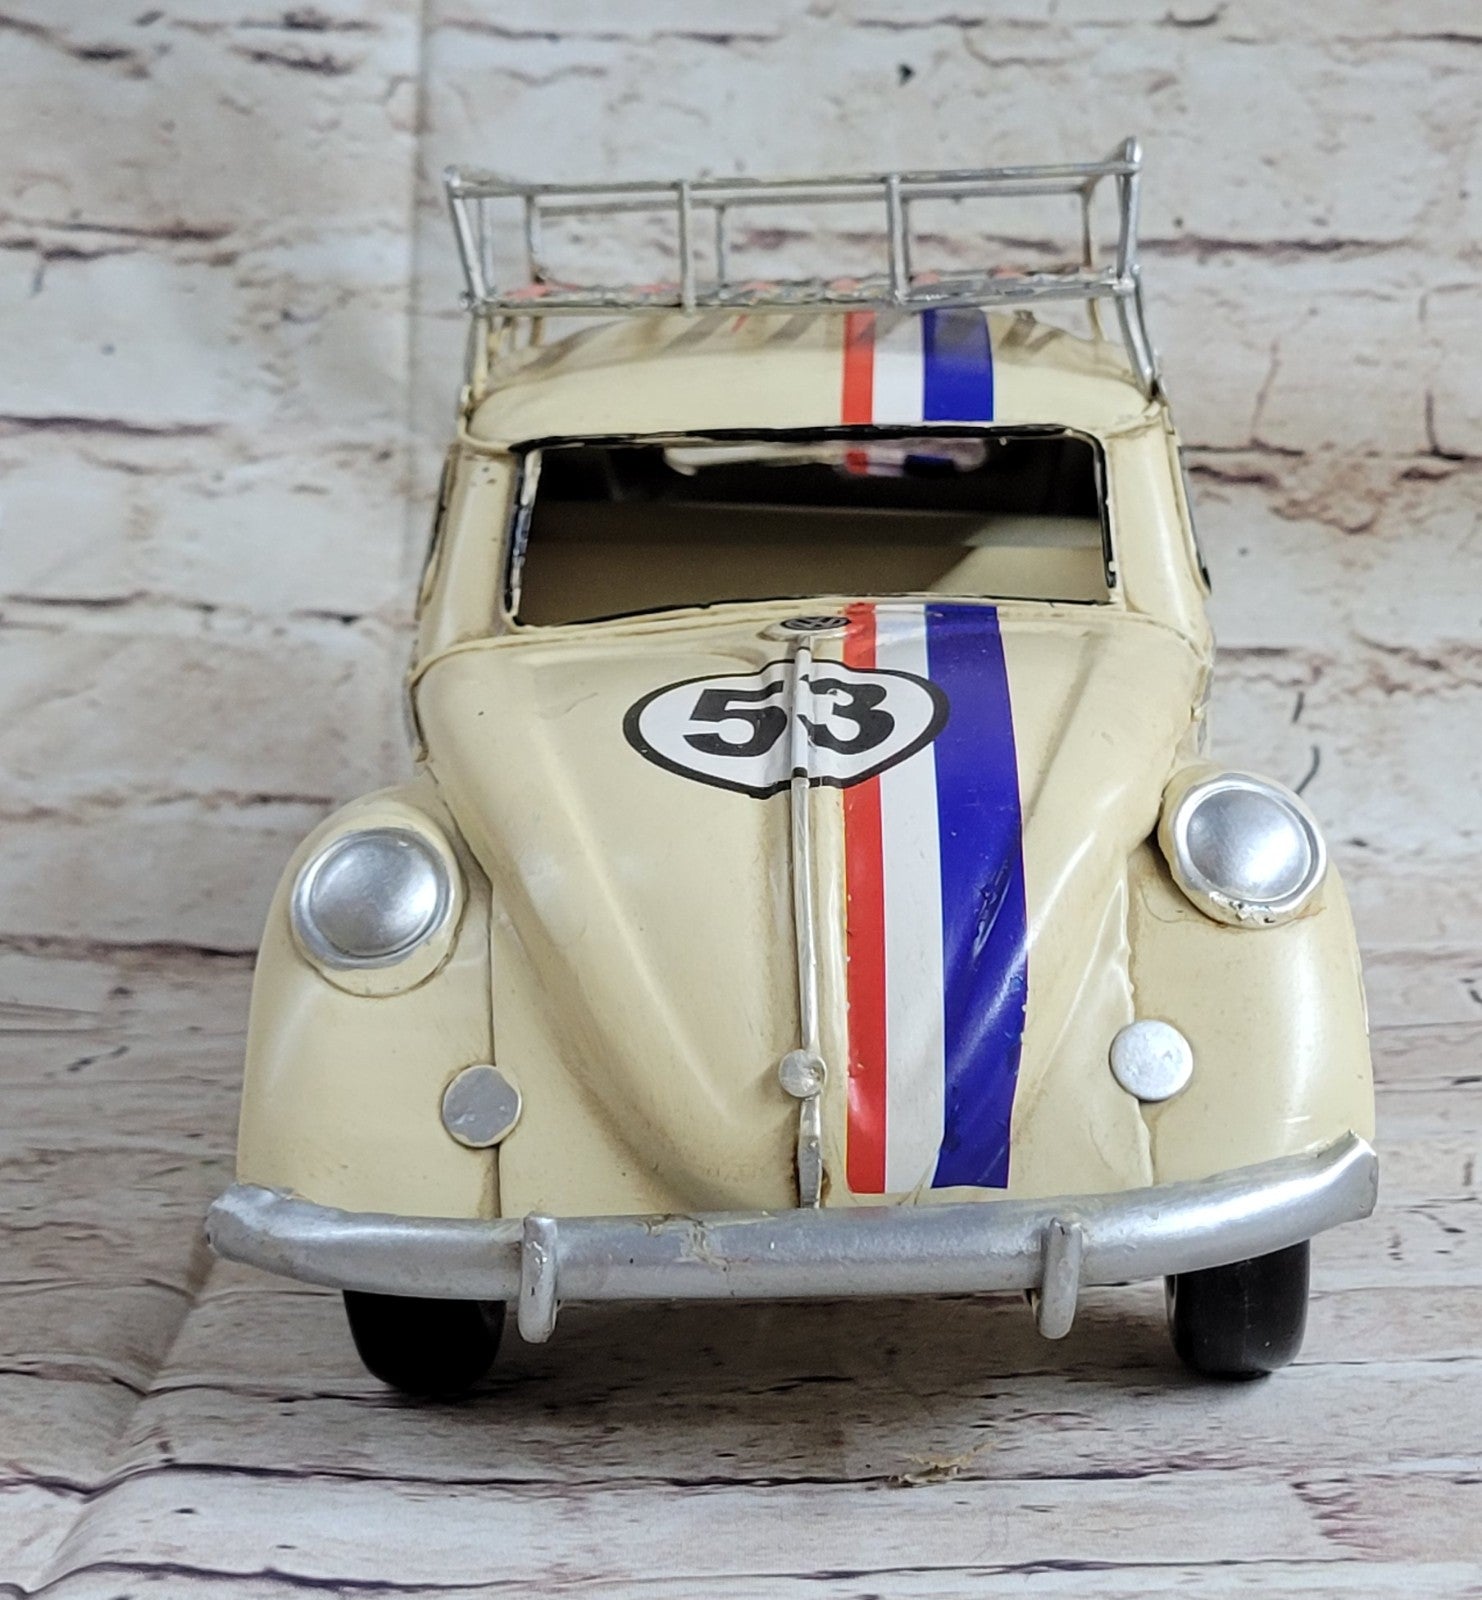 Herbie the Love Bug Volkswagen VW Beetle 1/8 Scale Mint New In Box Hot Cast